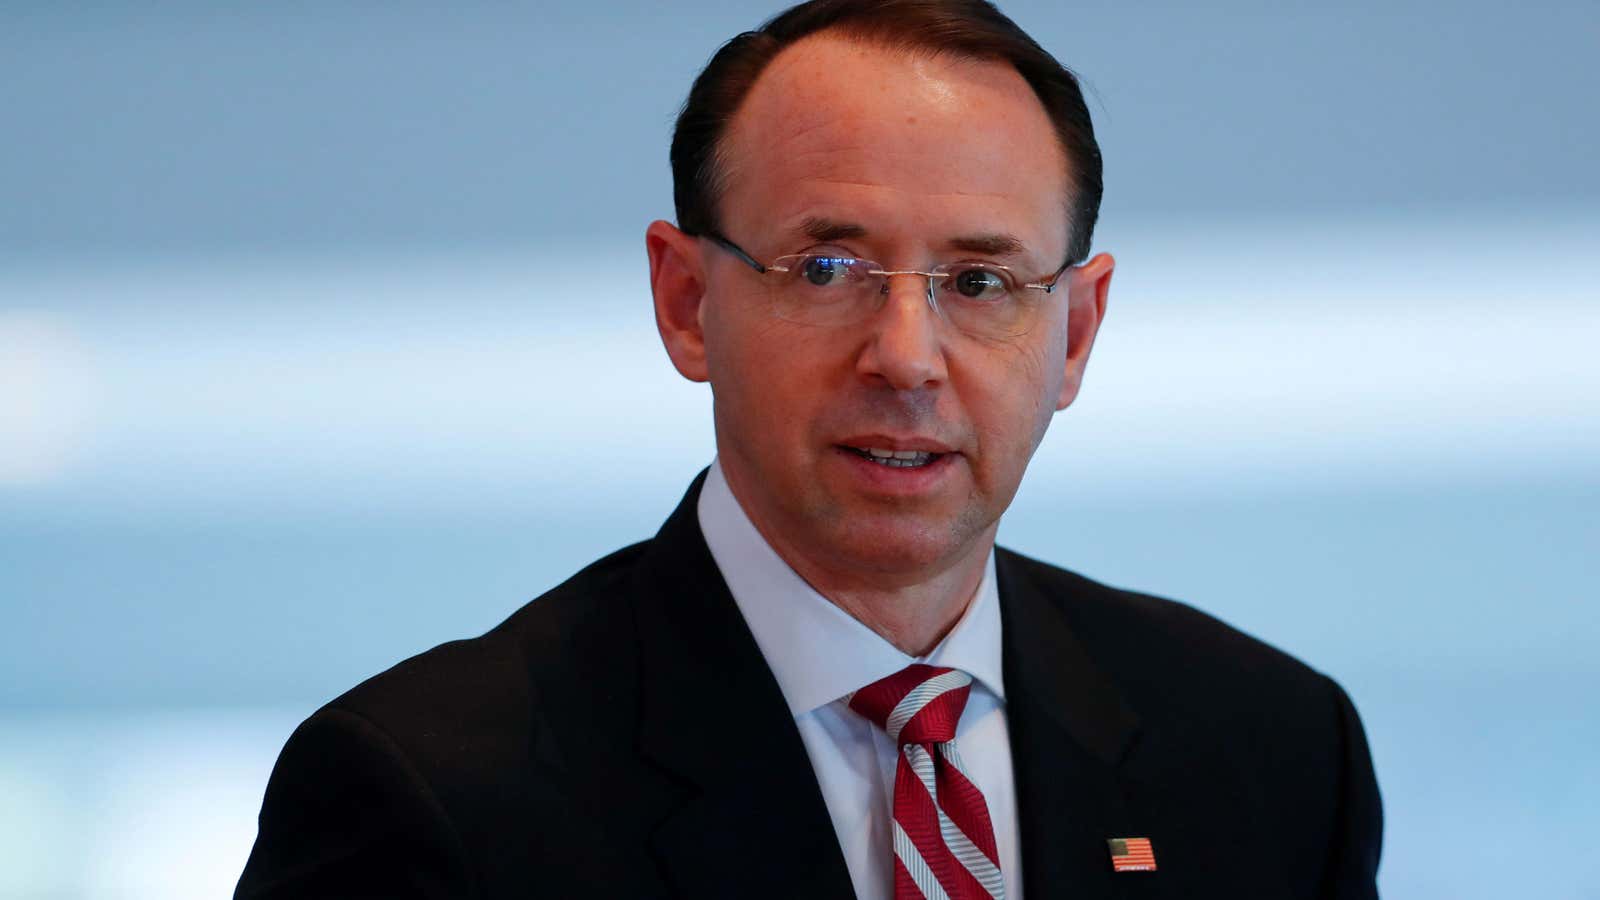 “Human nature is why we need rules, and it is why rules only work if we enforce them,” Rosenstein said.